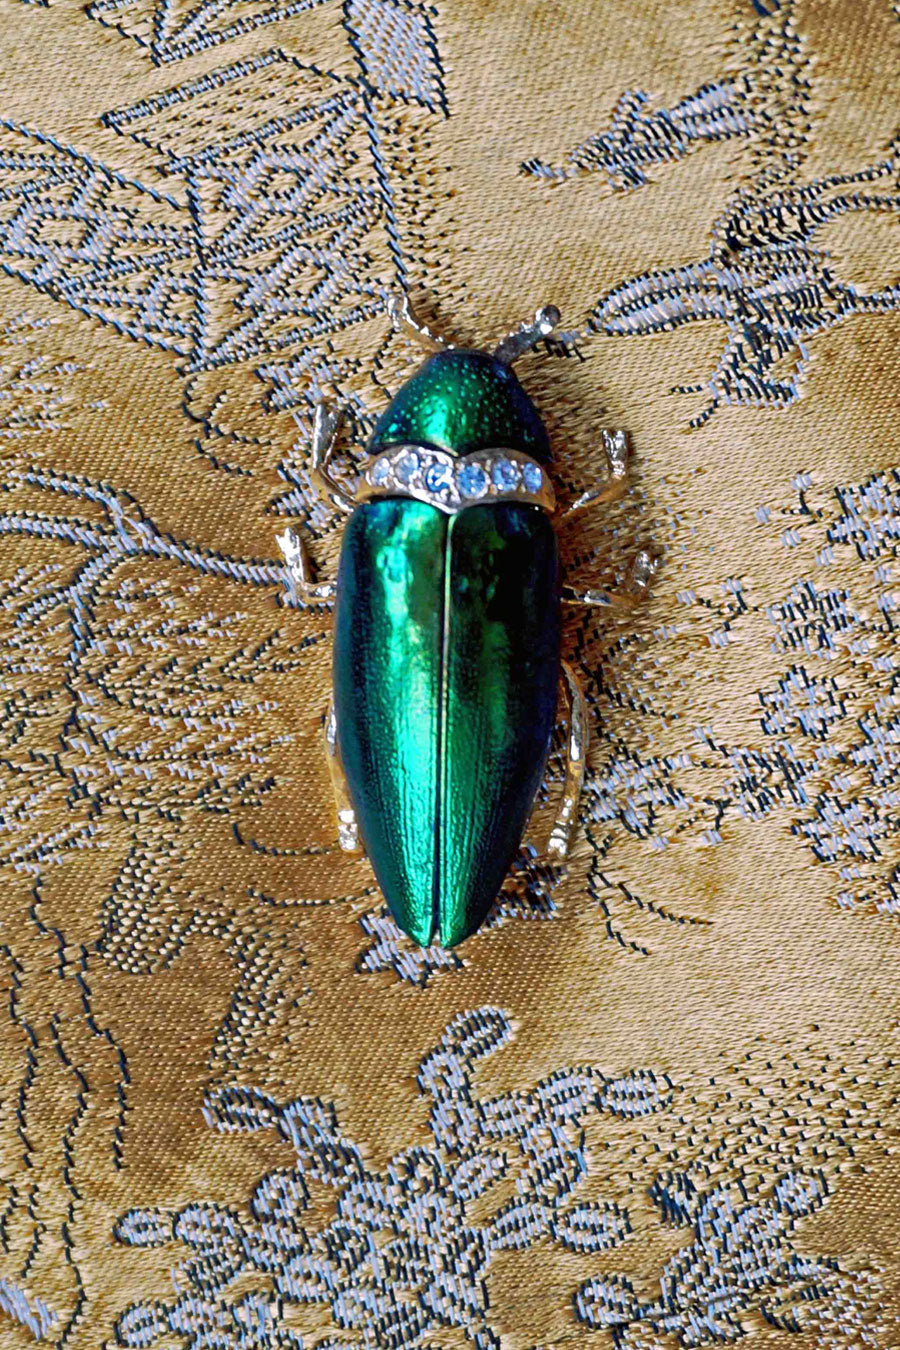 Vintage Iridescent Green Scarab Beetle Brooch, Green Beetle Pin Brooch Gift For Her - Ada's Attic Vintage- 